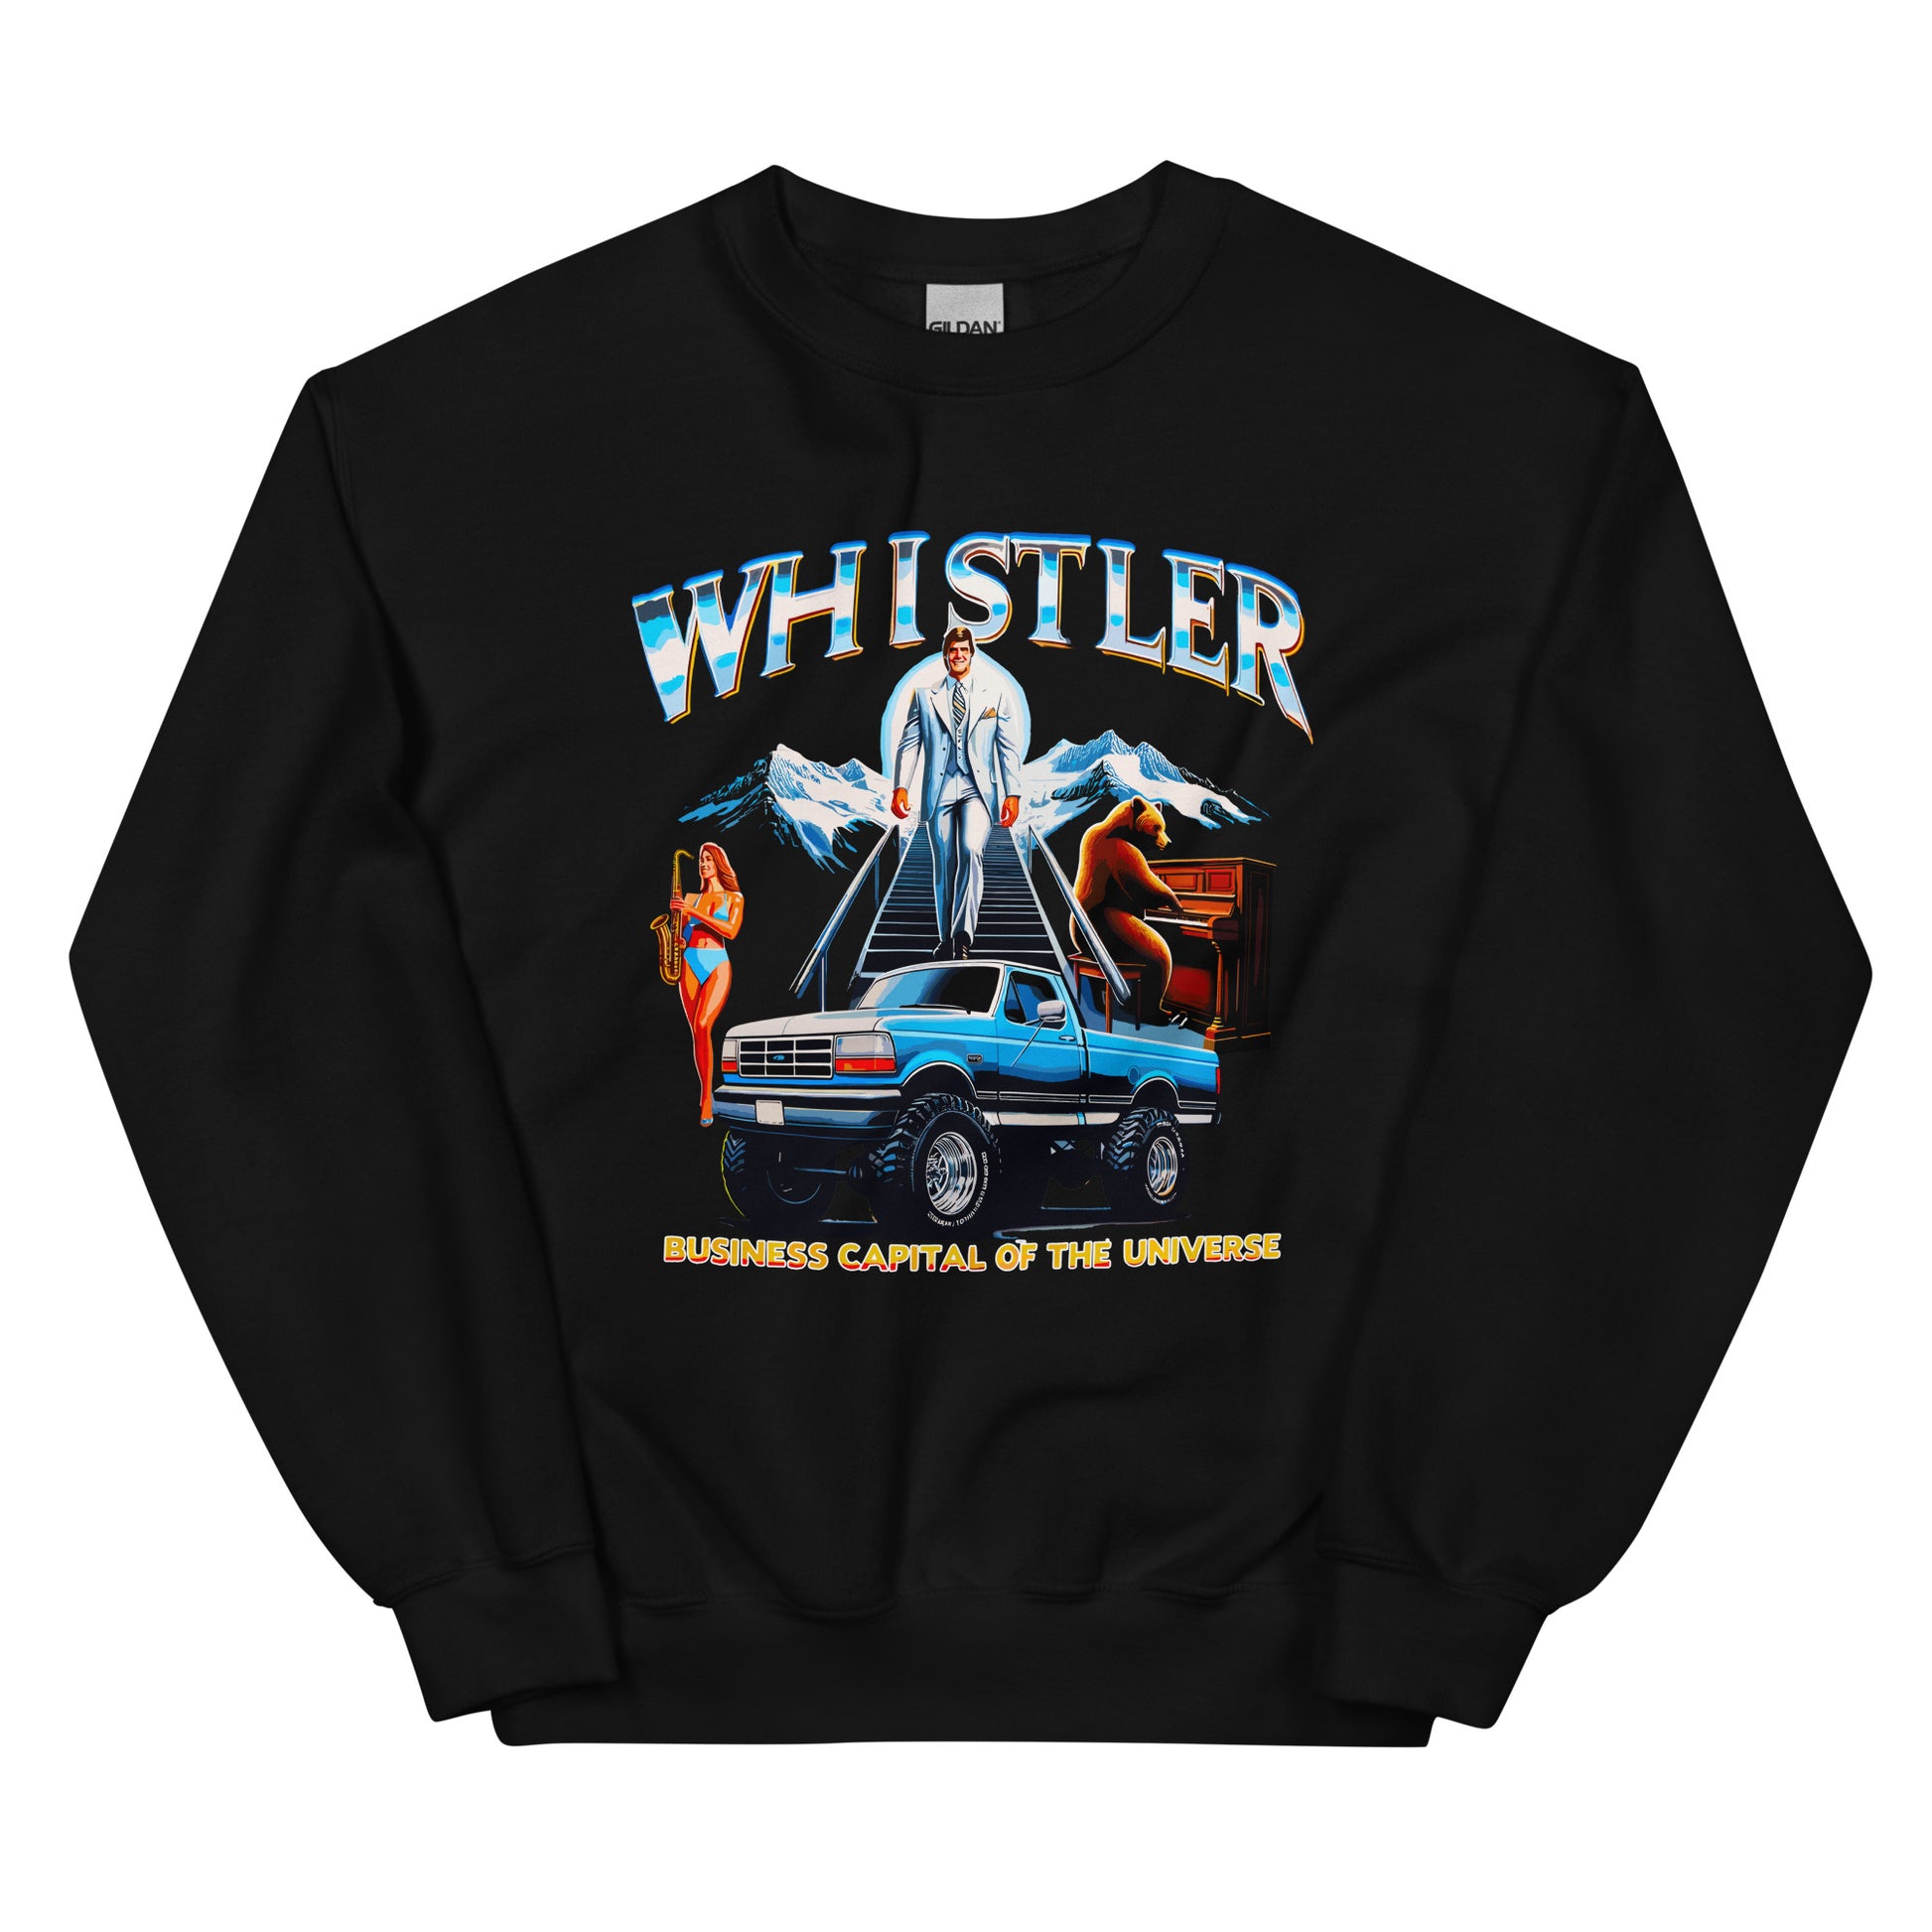 Whistler Business Capital of the Universe Crewneck Sweatshirt printed by Whistler Shirts